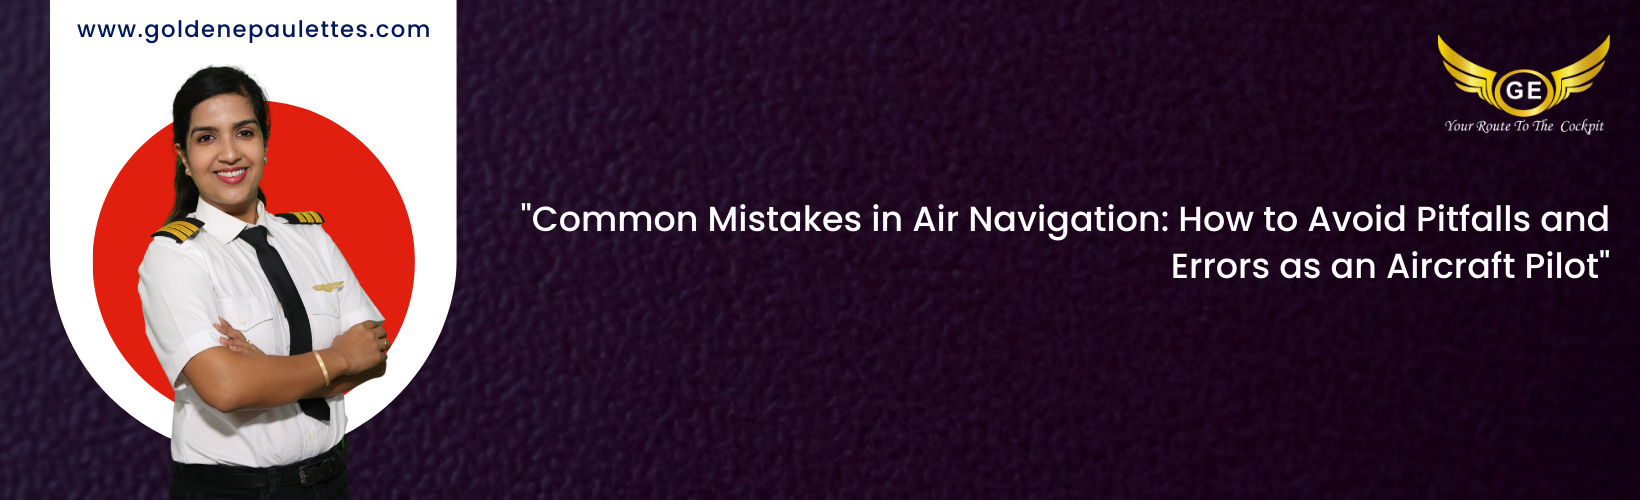 Common Mistakes in Air Navigation